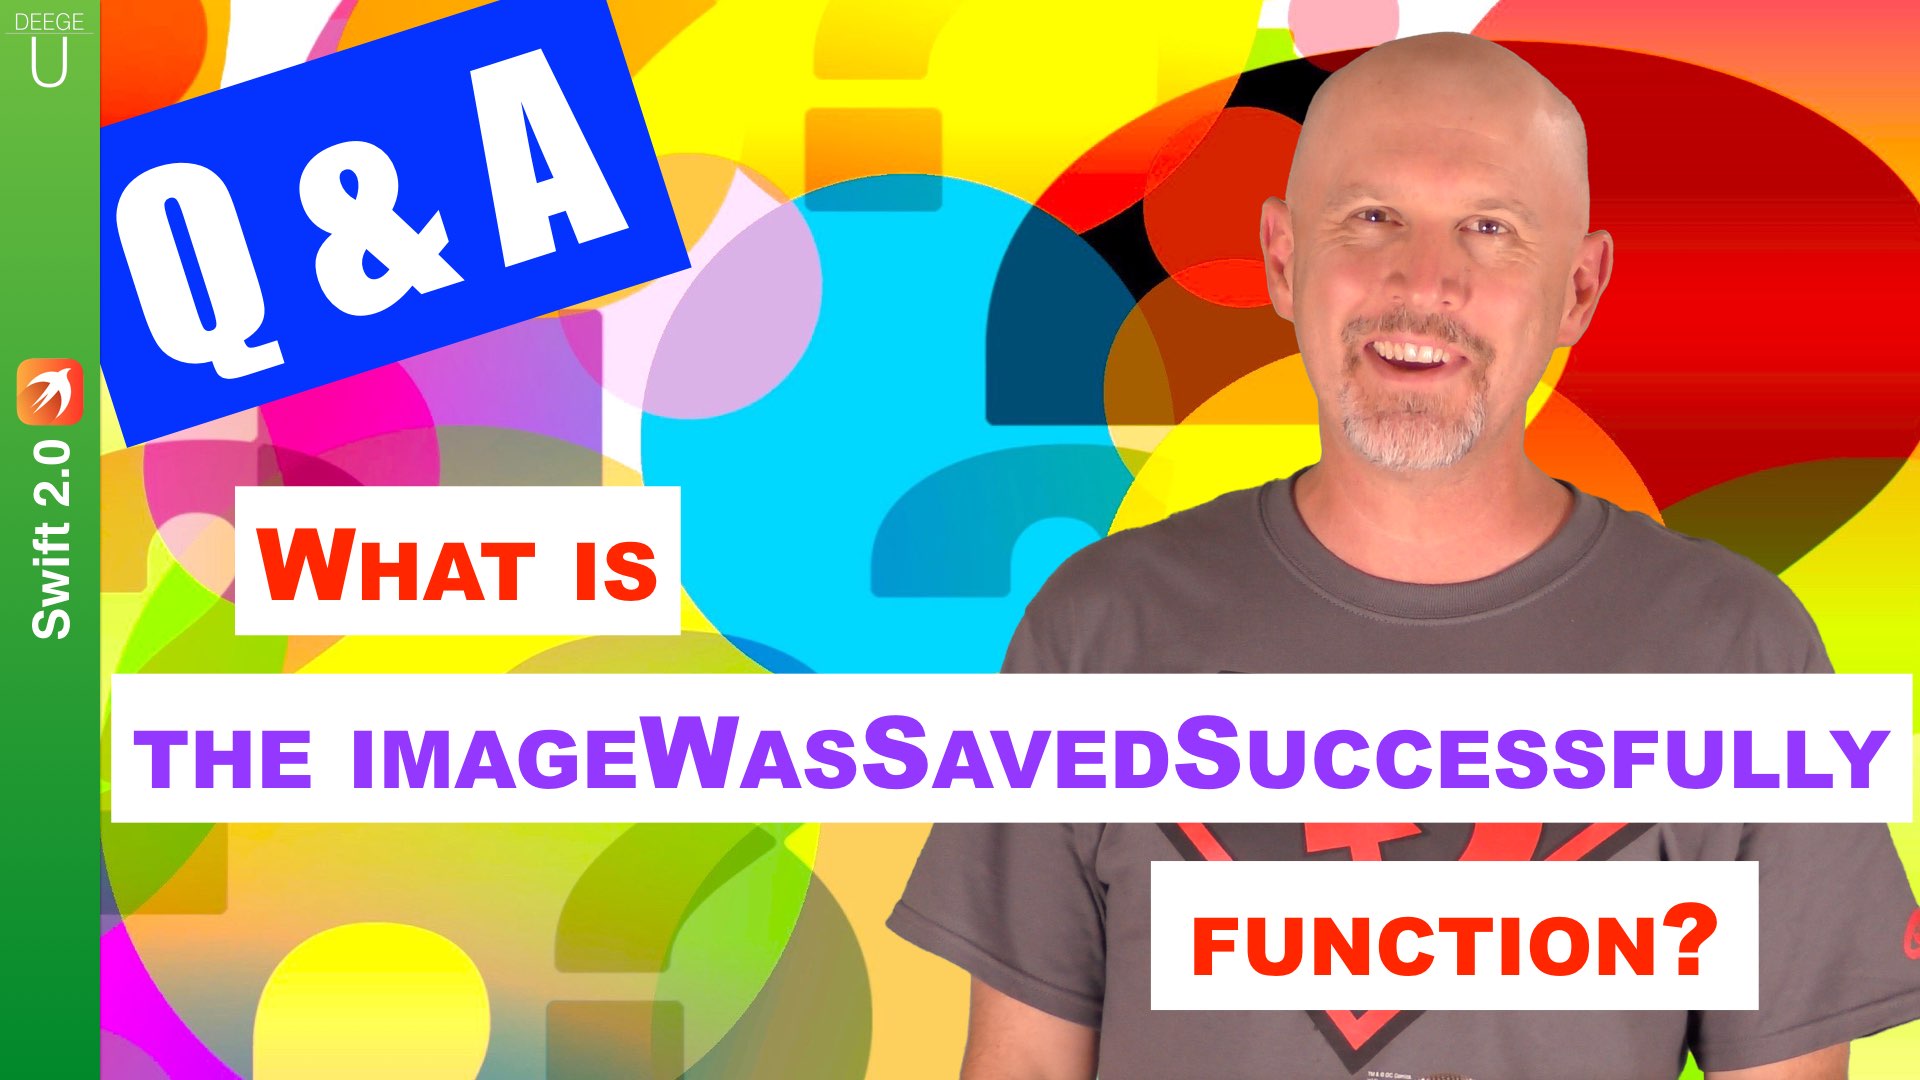 Question: What is the the imageWasSavedSuccessfully function?